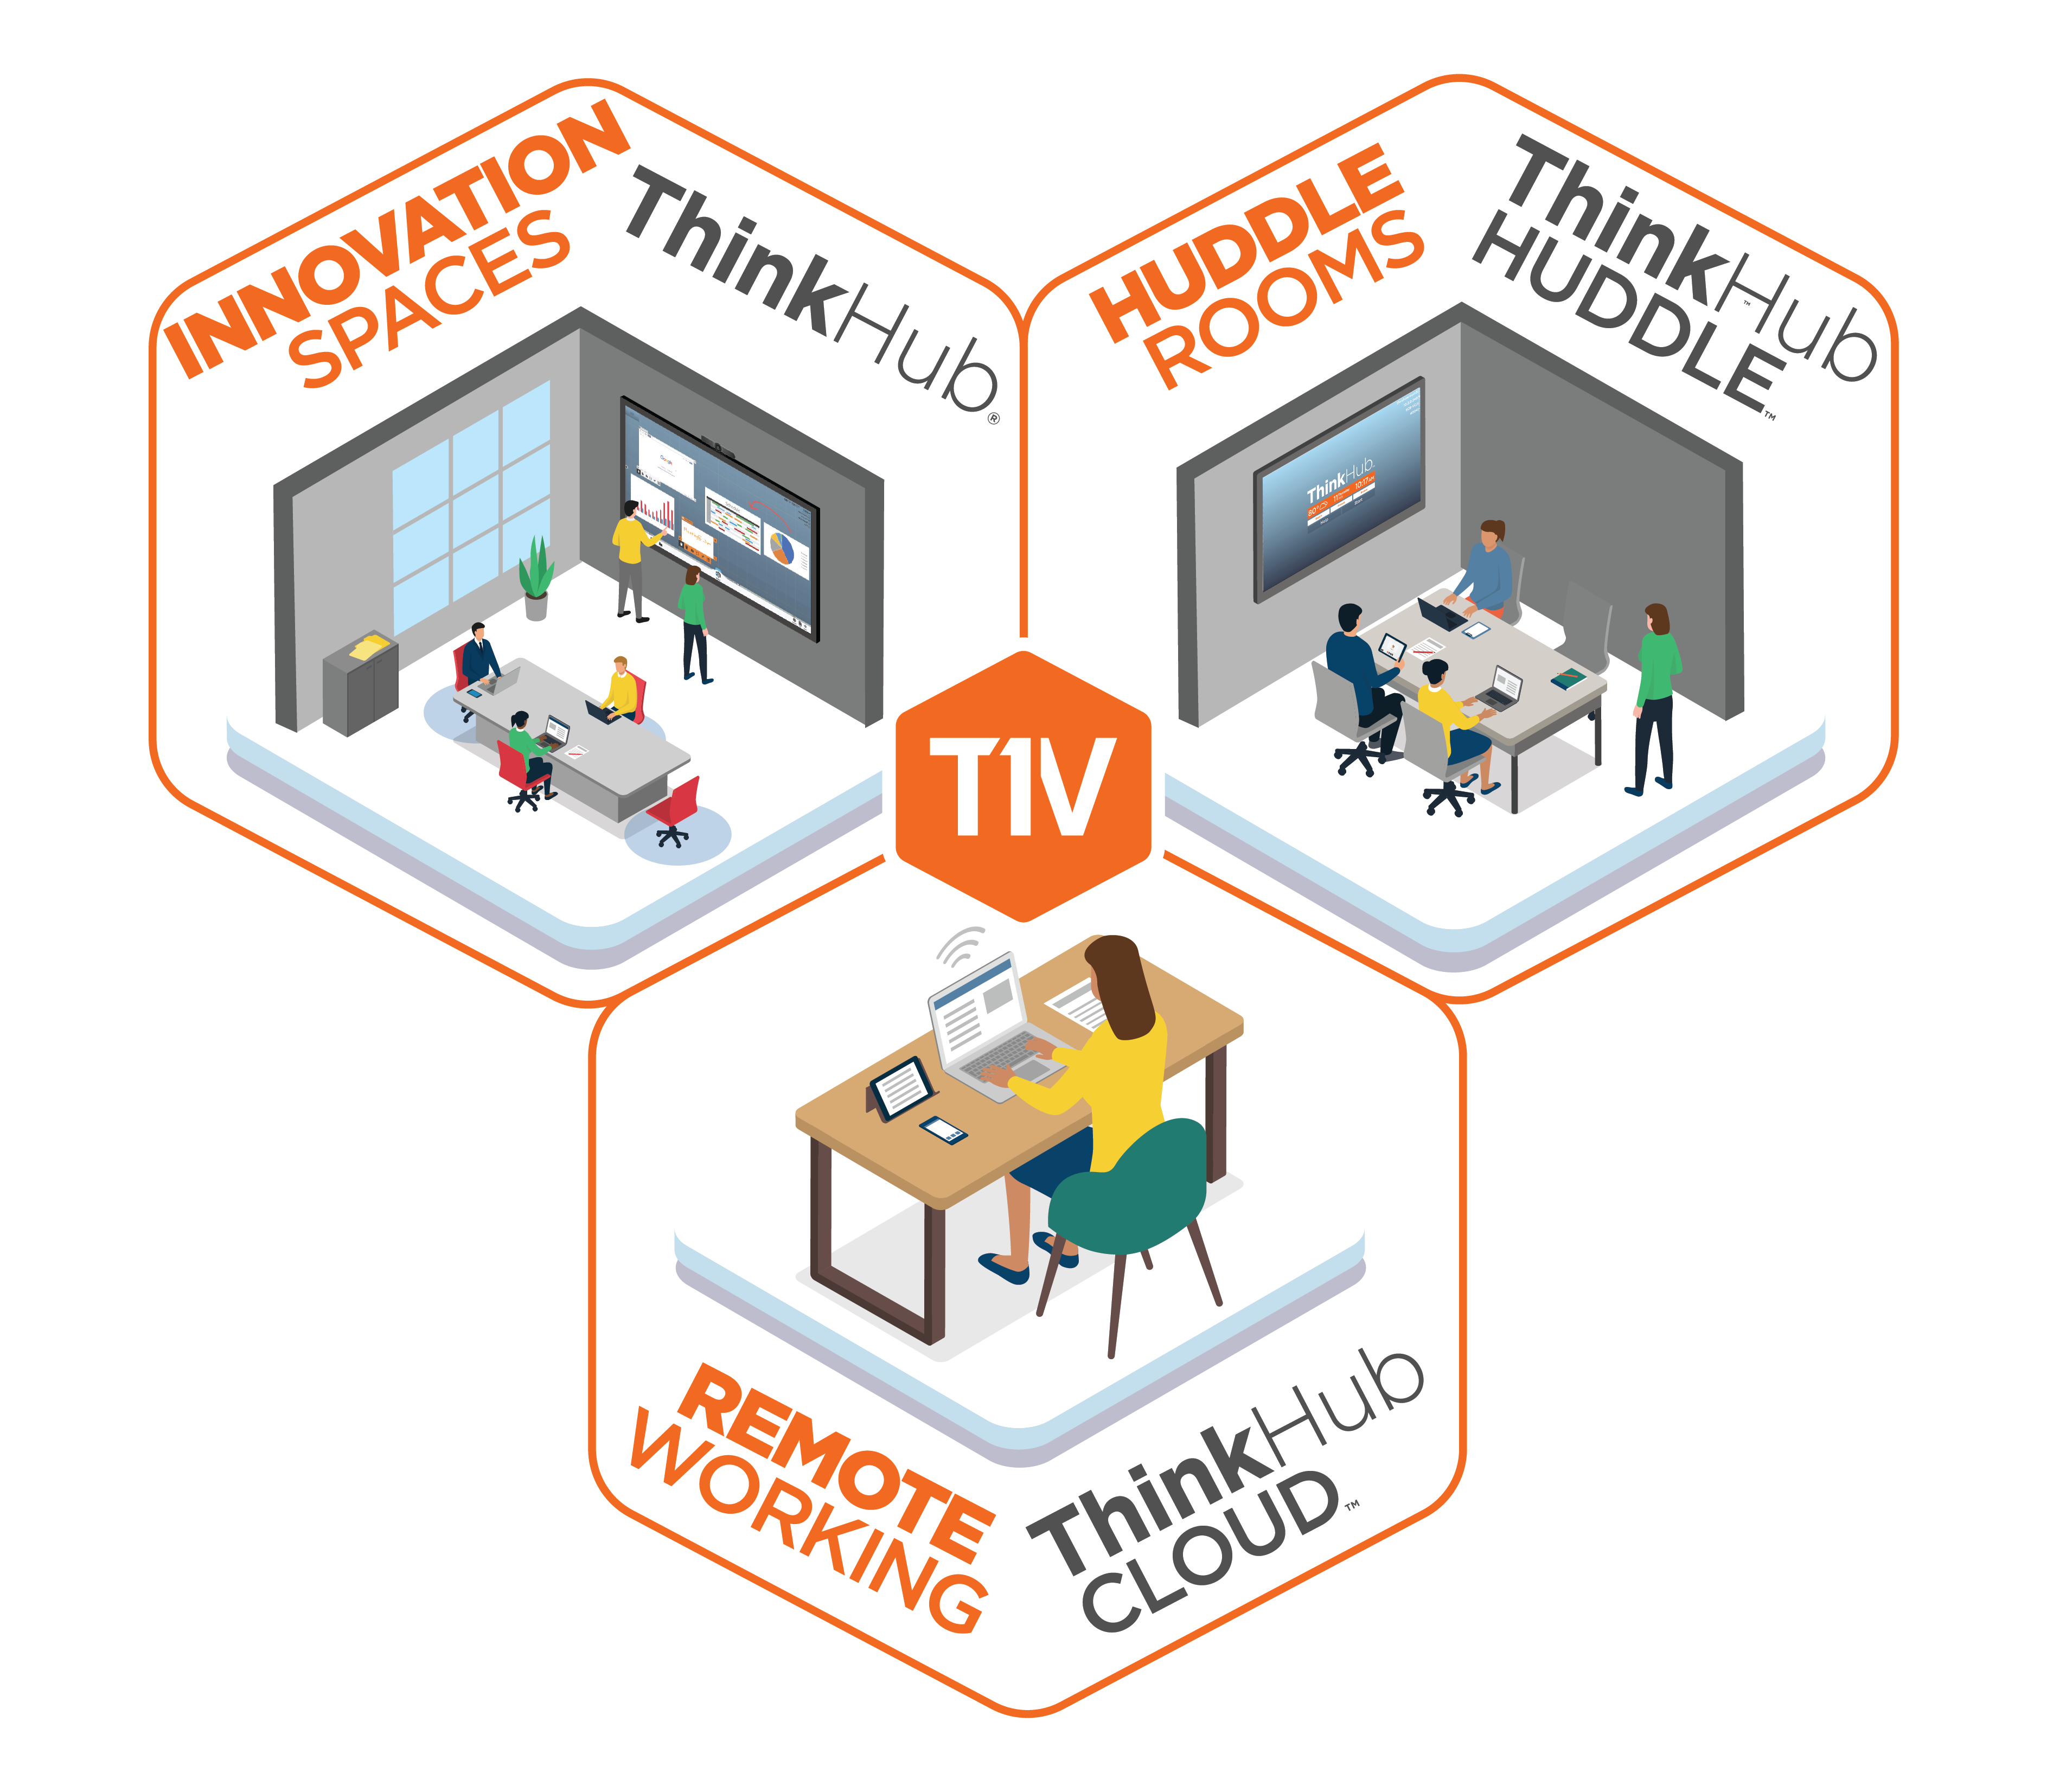 t1v-thinkhub-collaboration-software-huddle-cloud-inovation-remote-working